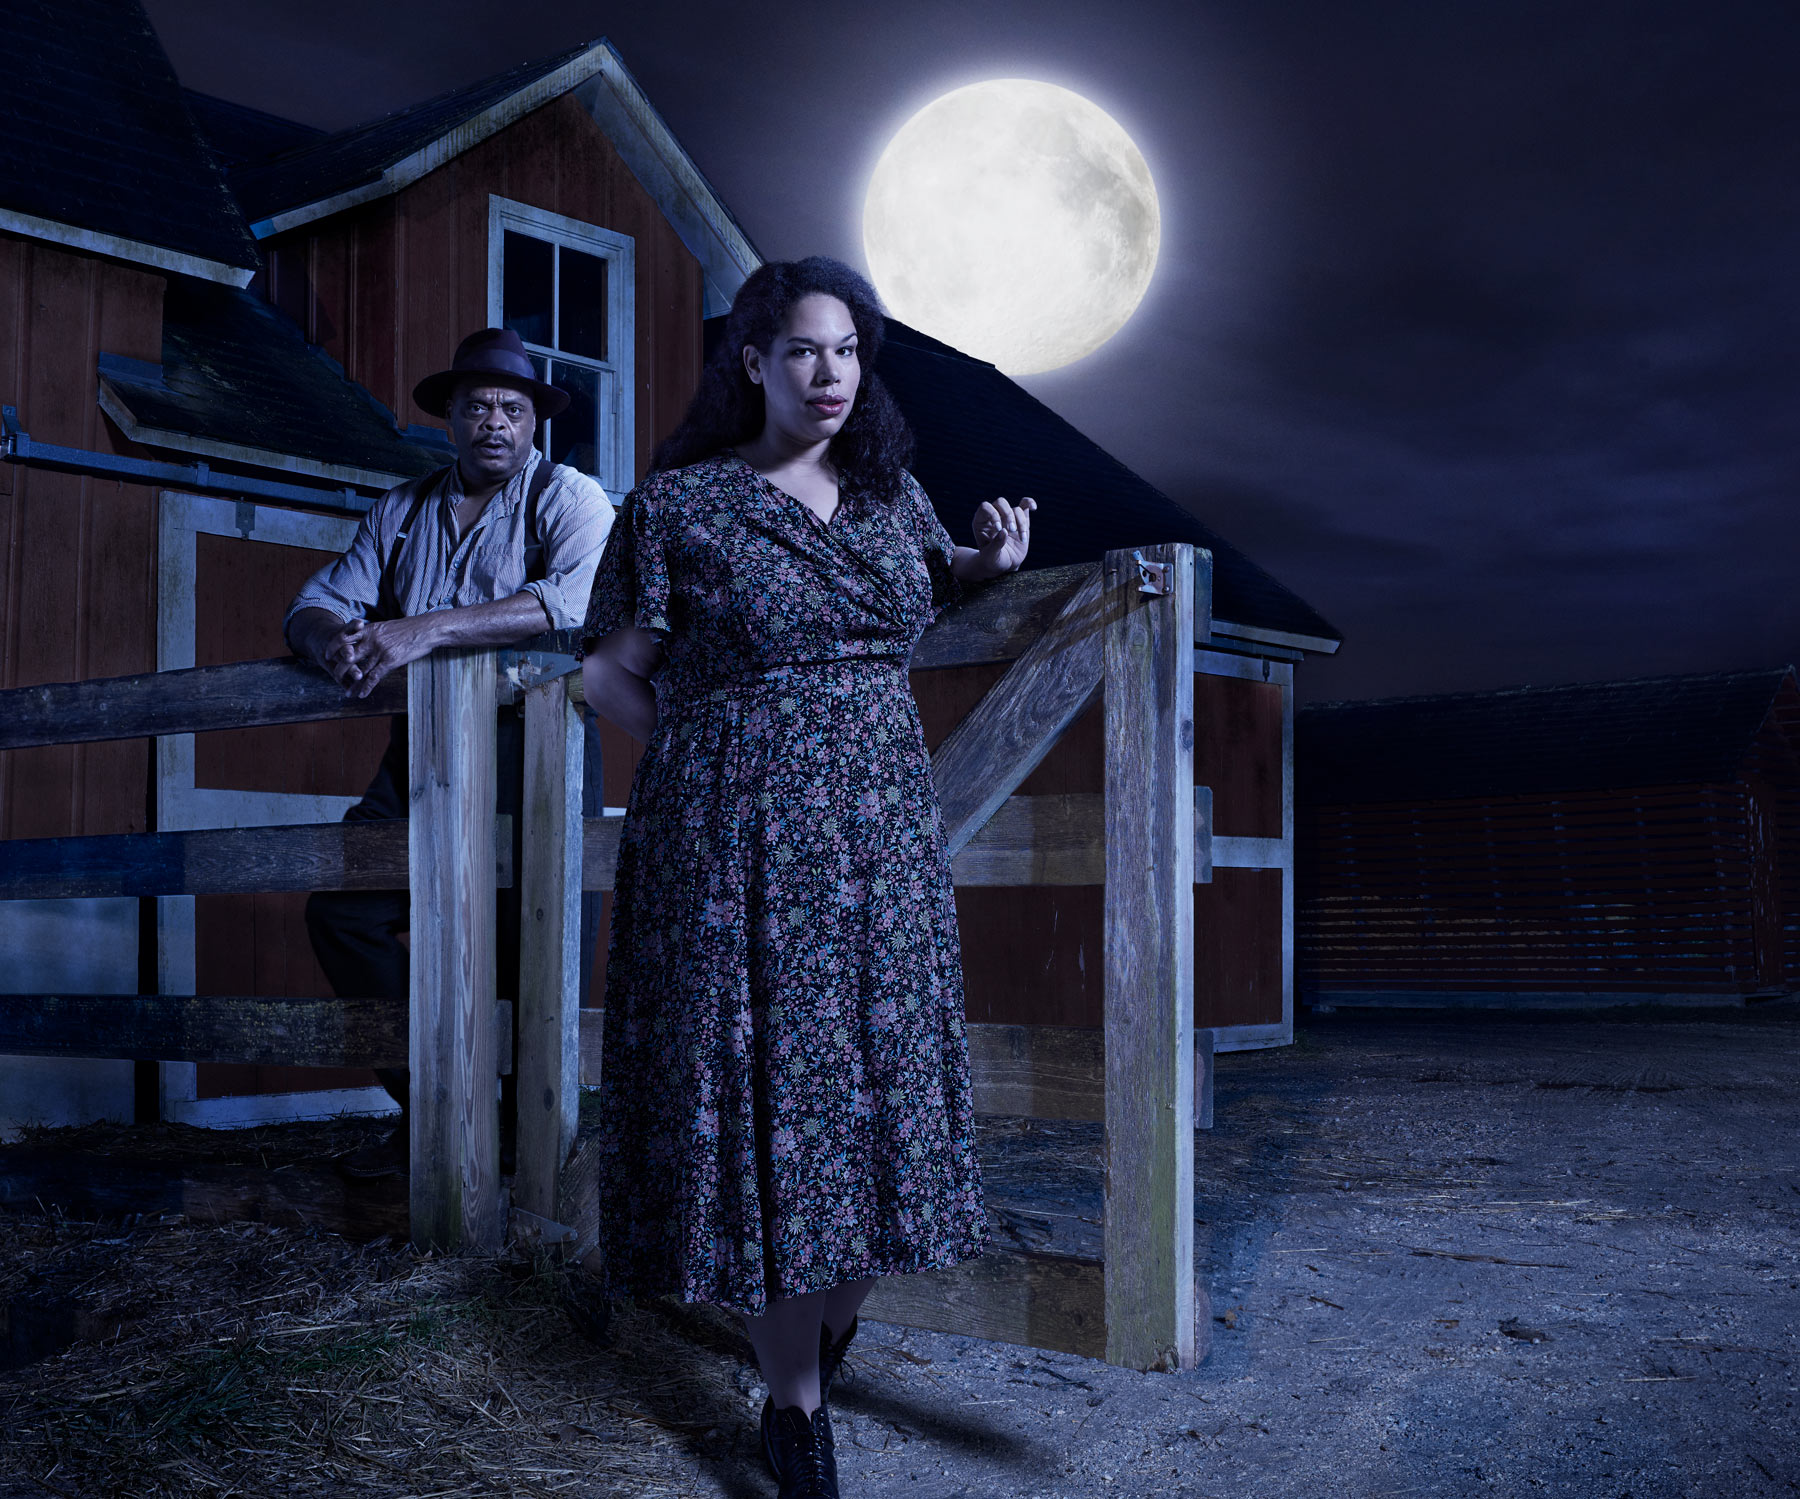 Woman and man on a farm at night under large moon | Conceptual portrait by Saverio Truglia